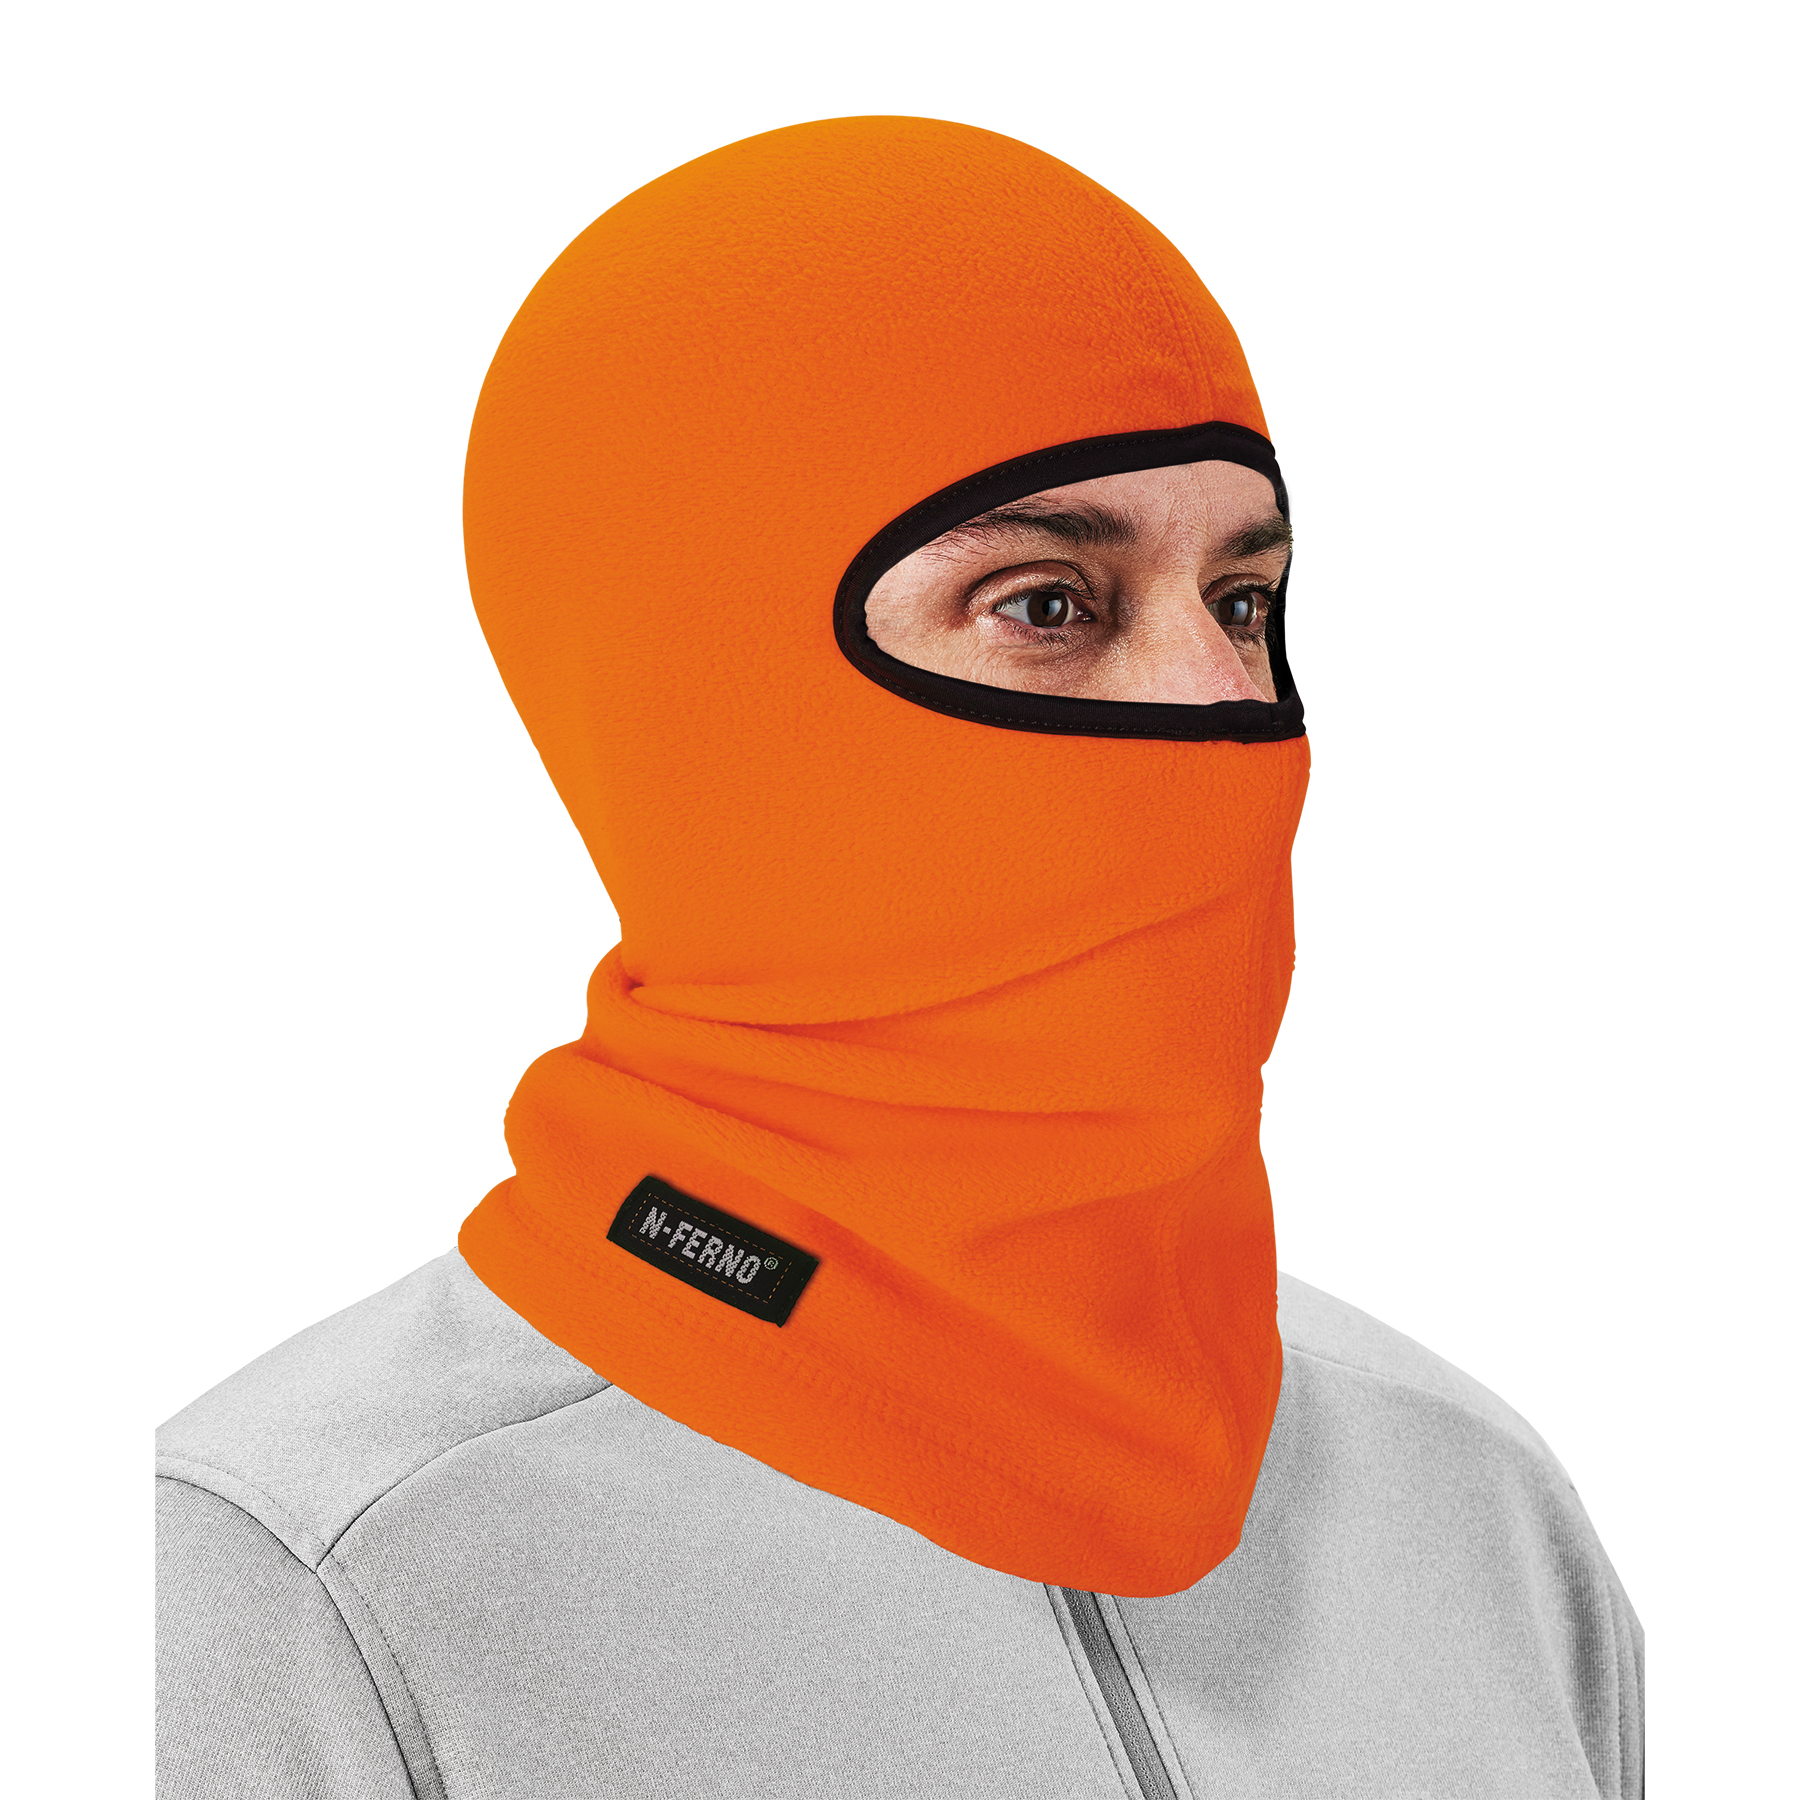 Tough Headwear Hunting Face Mask for Cold Weather - Orange Balaclava - Hi Visibility Ski Mask for Men - Hunting Face Cover